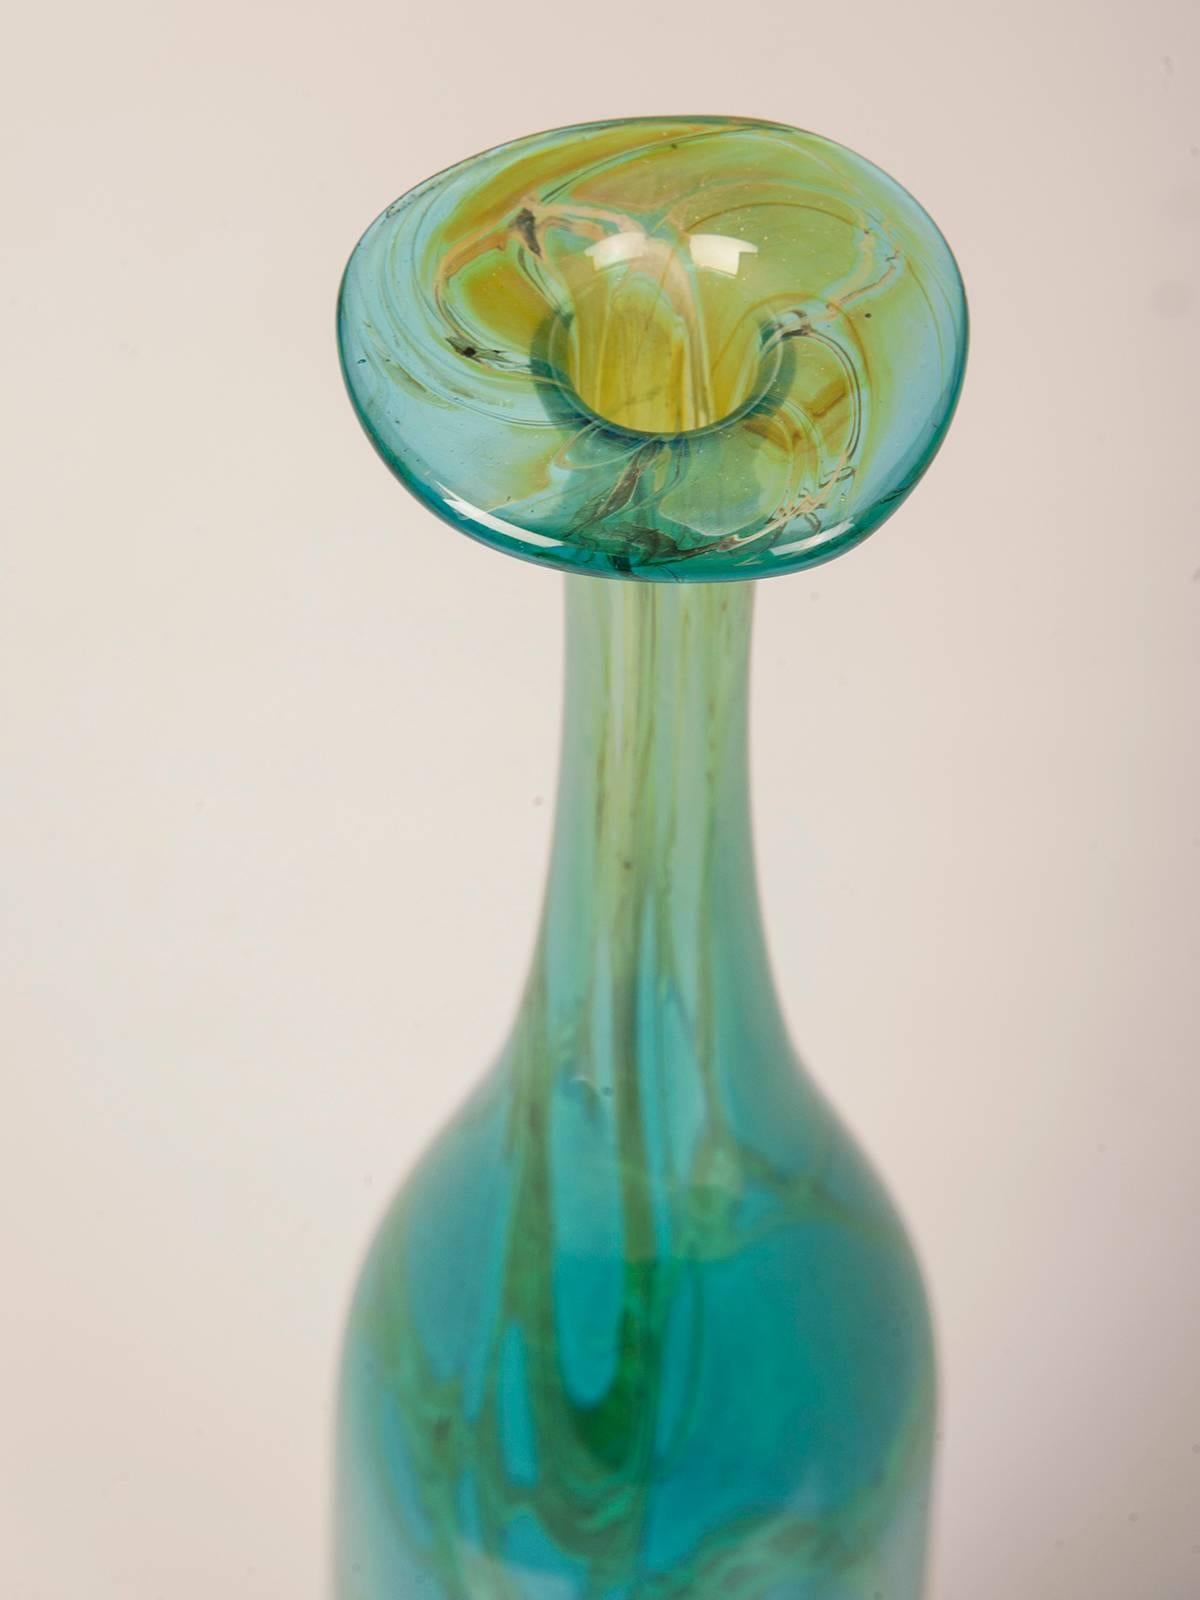 A tall handblown vintage Maltese Mdina glass bottle with a slender neck and flared lip in a striking shade of turquoise from Malta, circa 1975. Capturing the iridescent colors of the Mediterranean Sea Mdina glass was created in a workshop on the